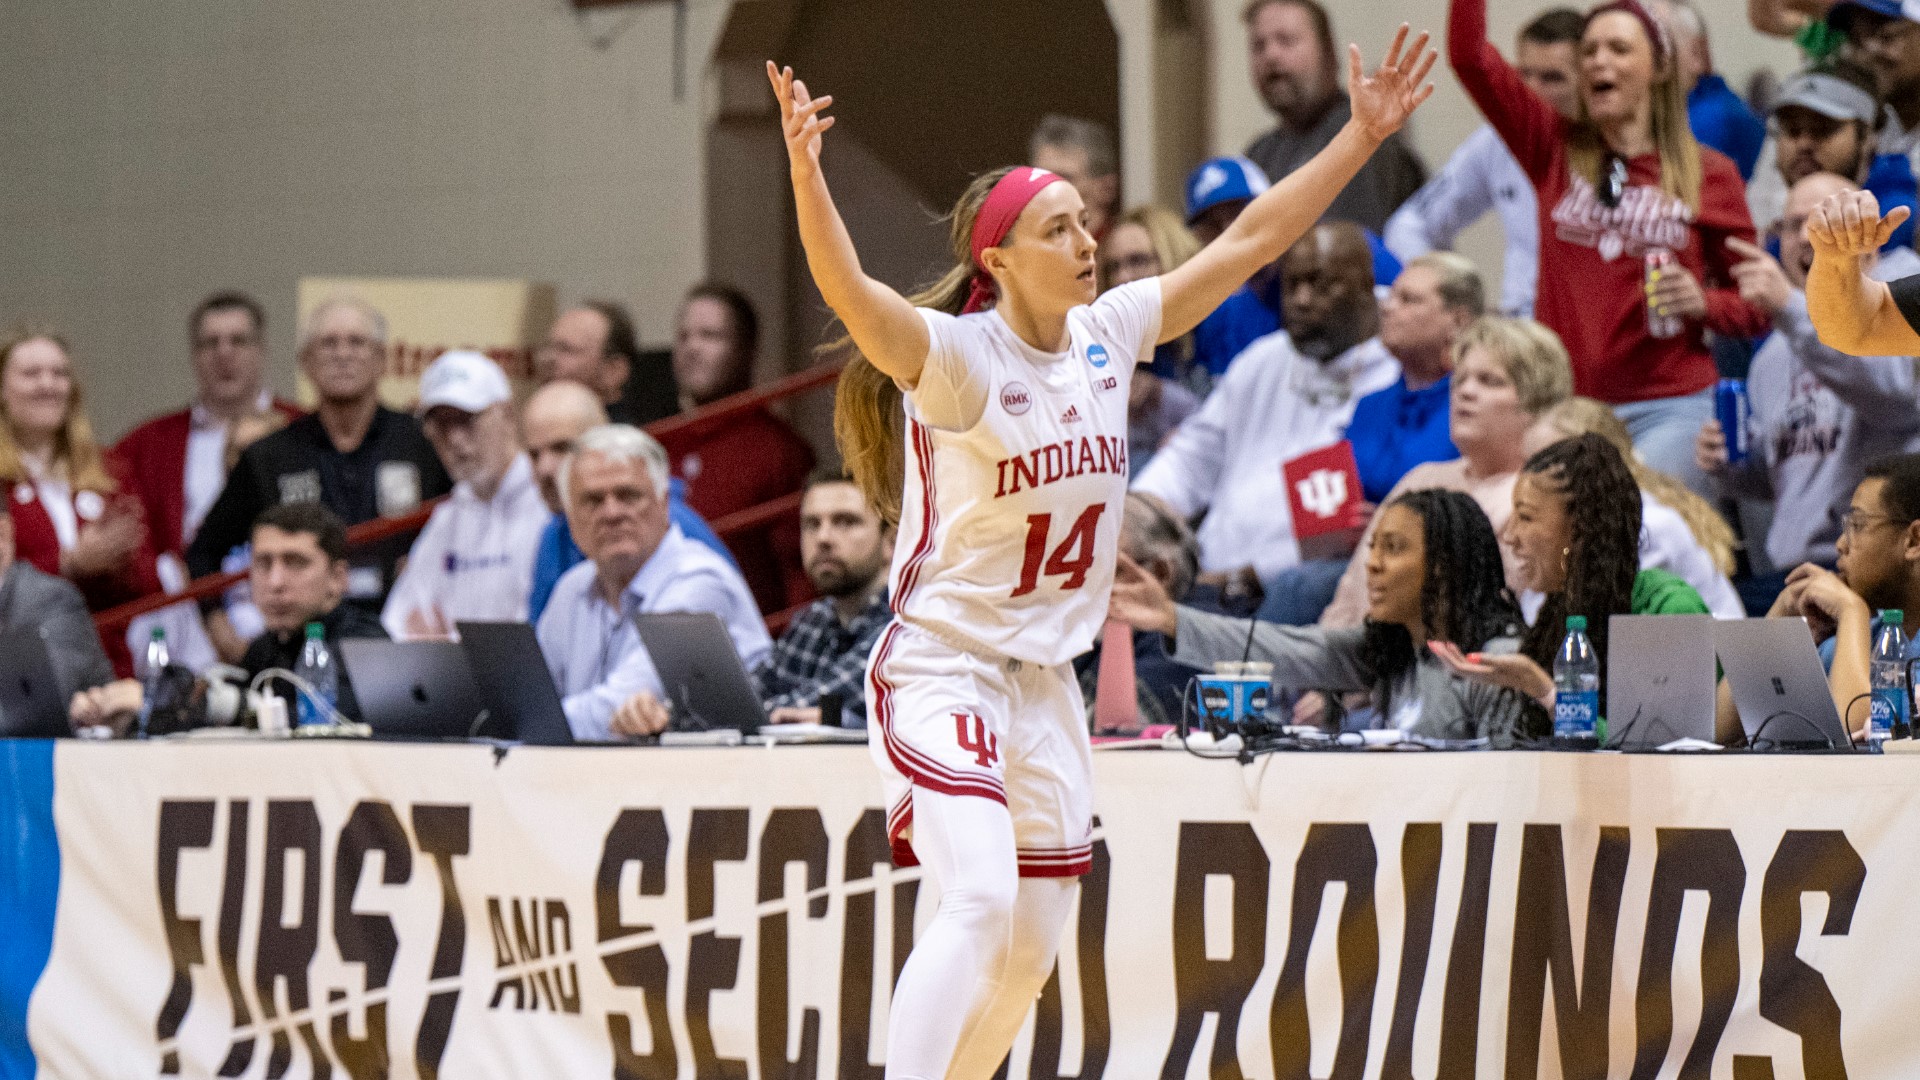 13Sports director Dave Calabro reports from Assembly Hall following IU women's basketball's 89-56 win over Fairfield in the first round of the NCAA women's tourney.